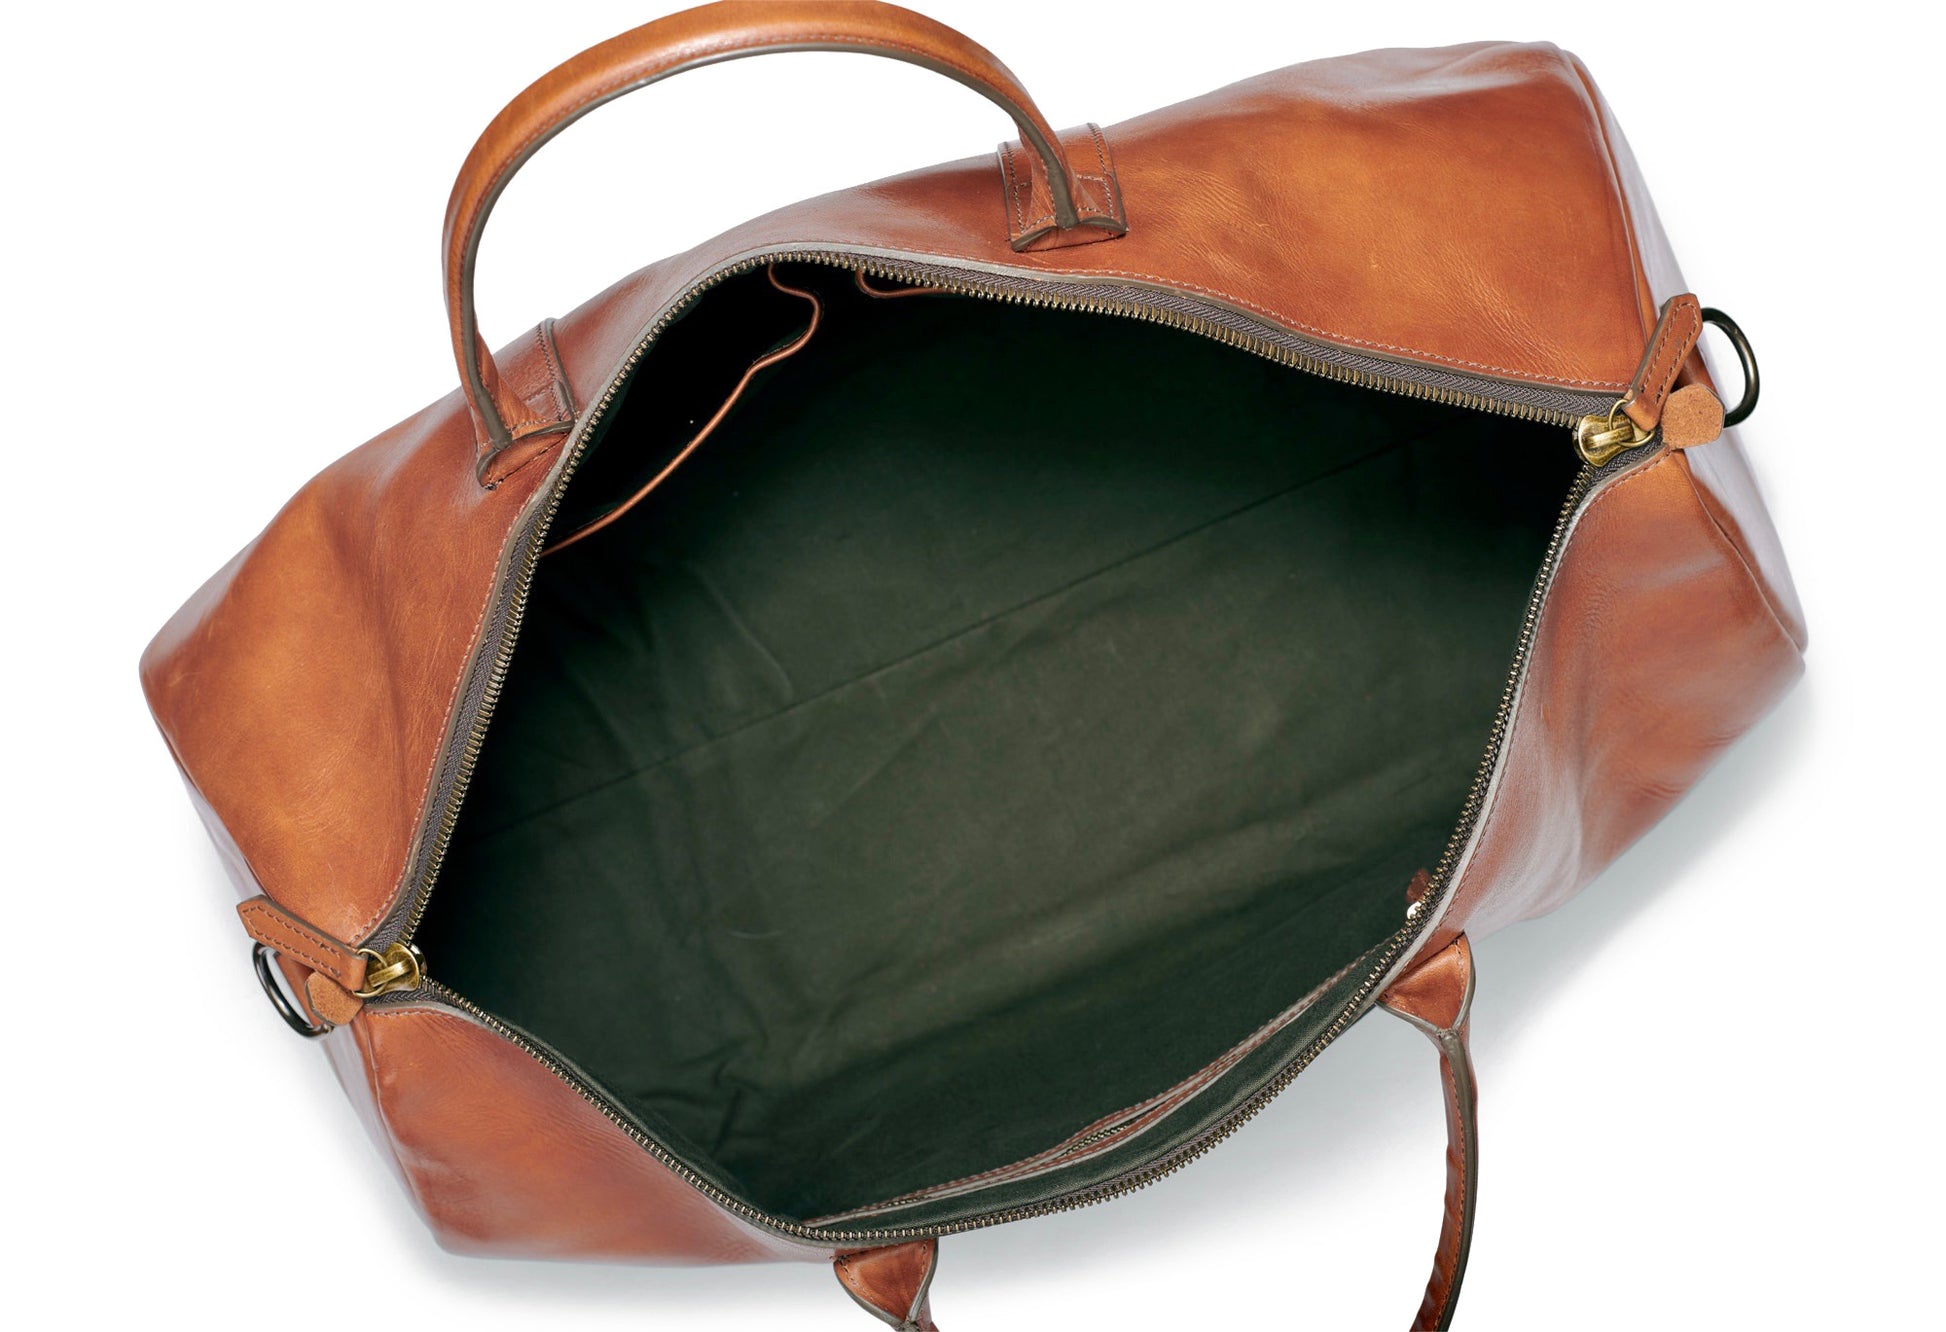 inside water repellent army green canvas of full grain leather duffle by Jackson Wayne 